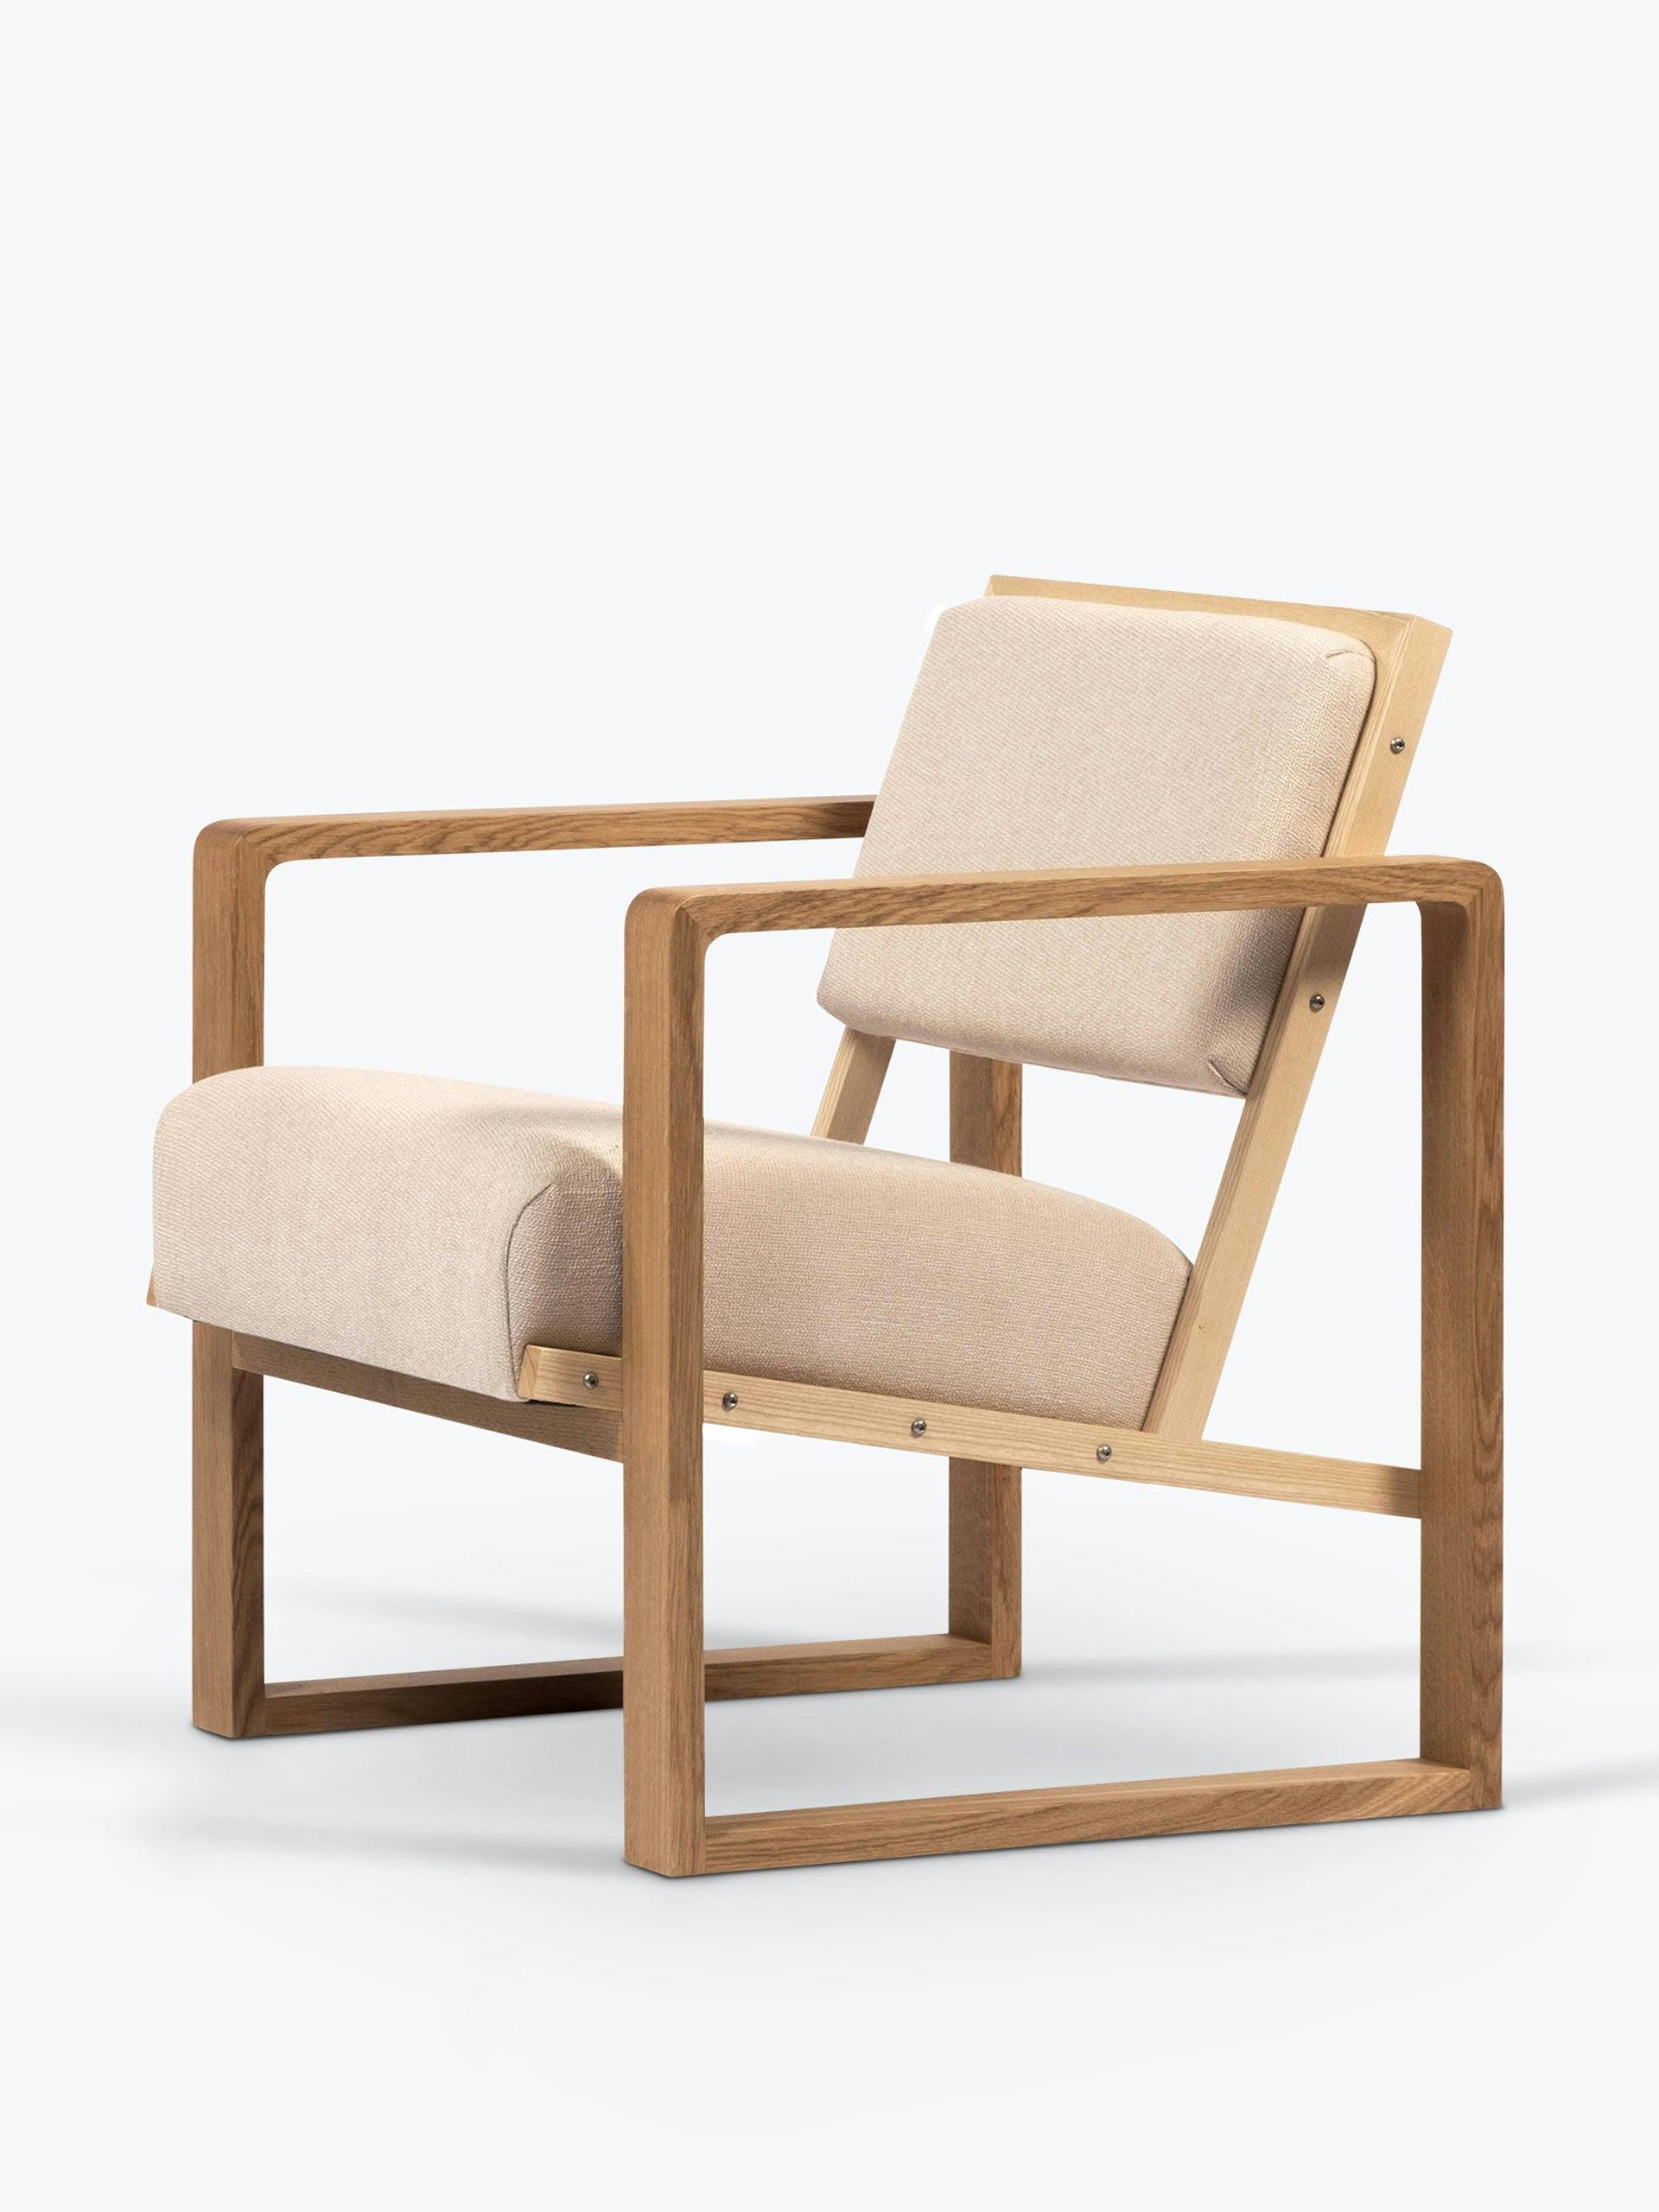 Lounge chair by Josef Albers